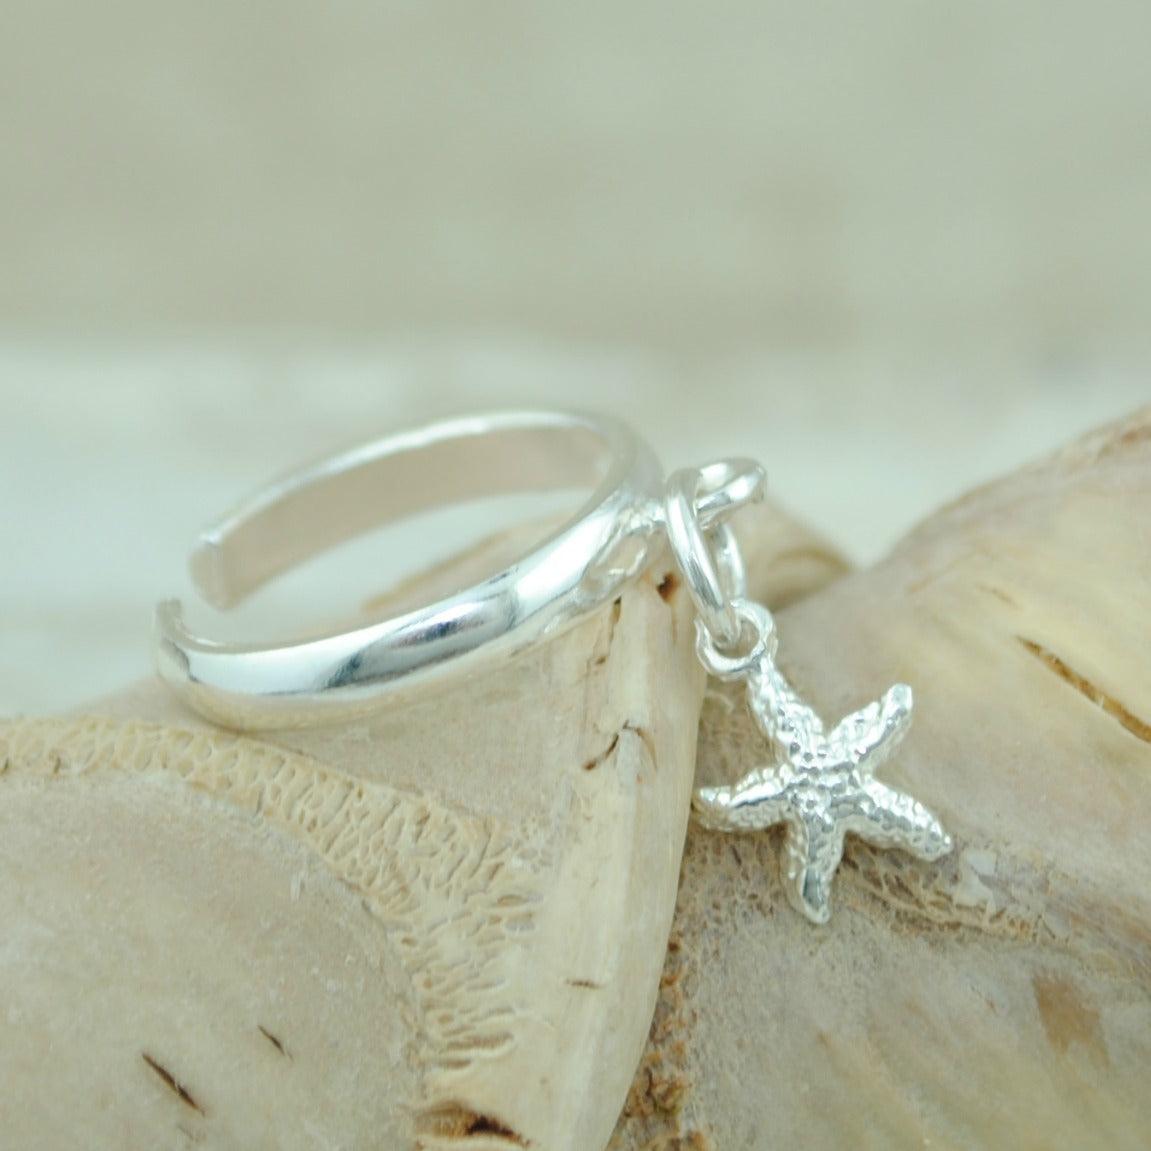 Sterling Silver Toe Rings for Sale | Buy a New Toe Ring Today ...